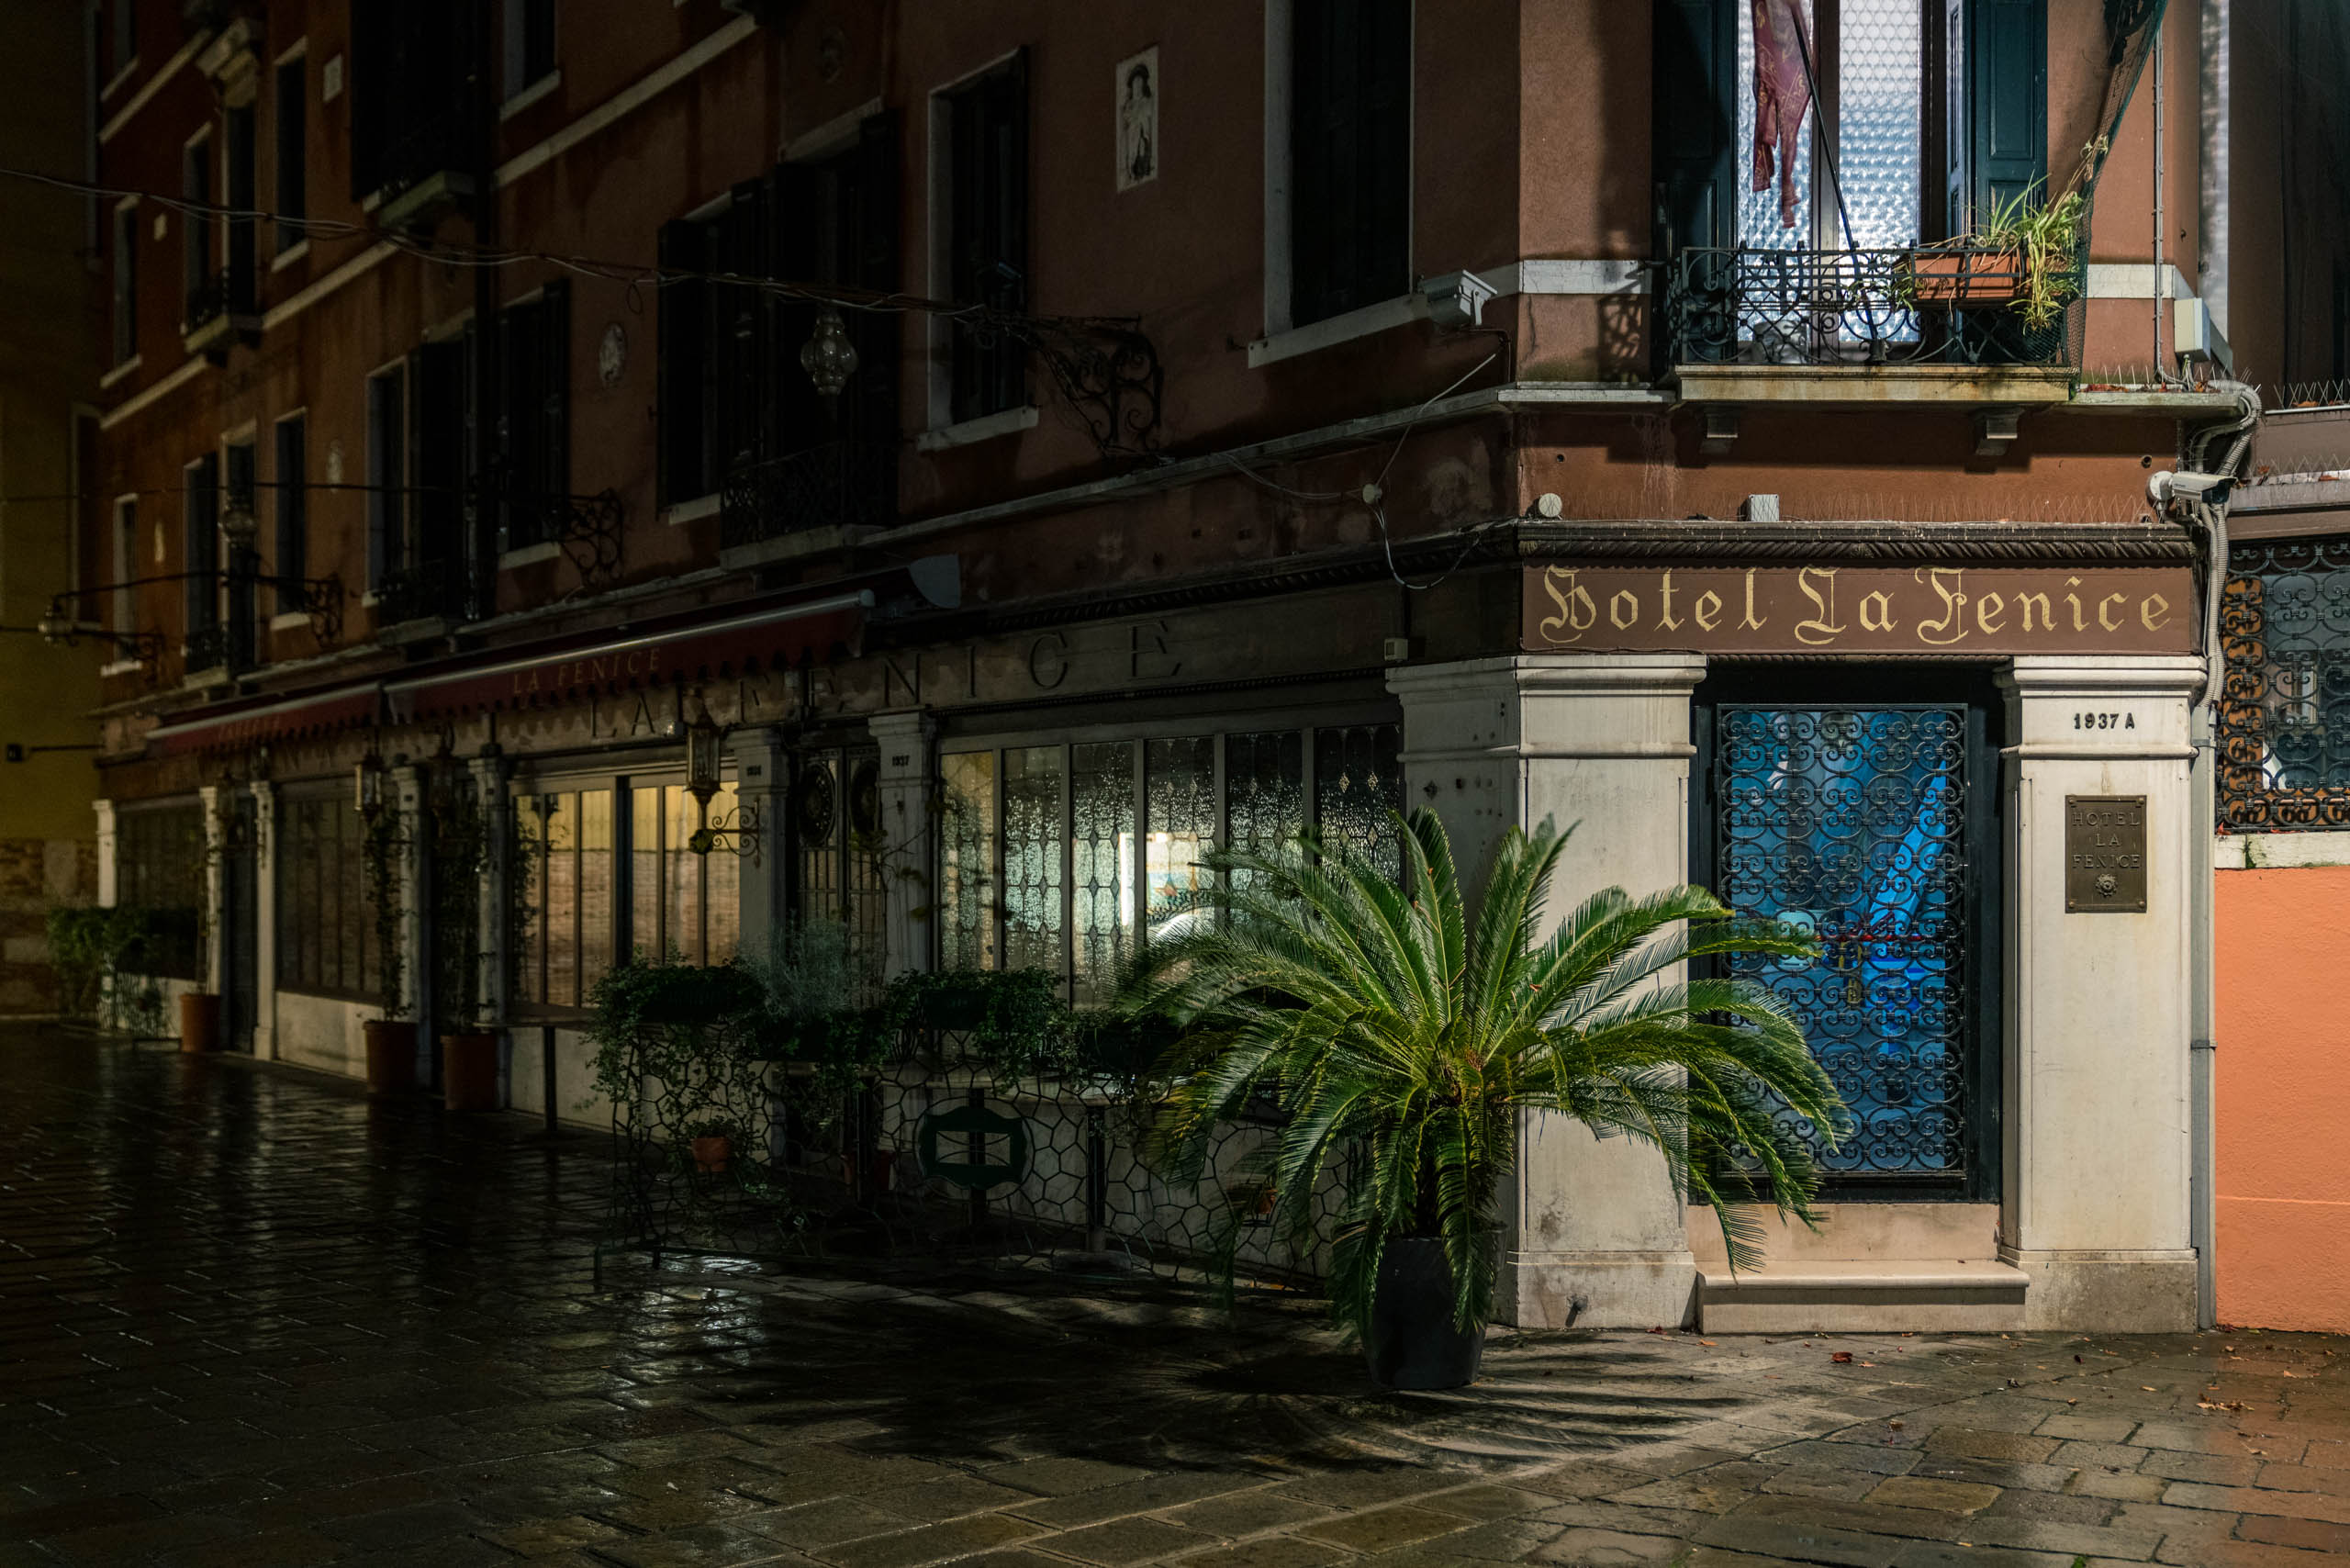 Travel and street photography of Venice or Venezia, Italy made by New York photographer Mary Catherine Messner (mcmessner).